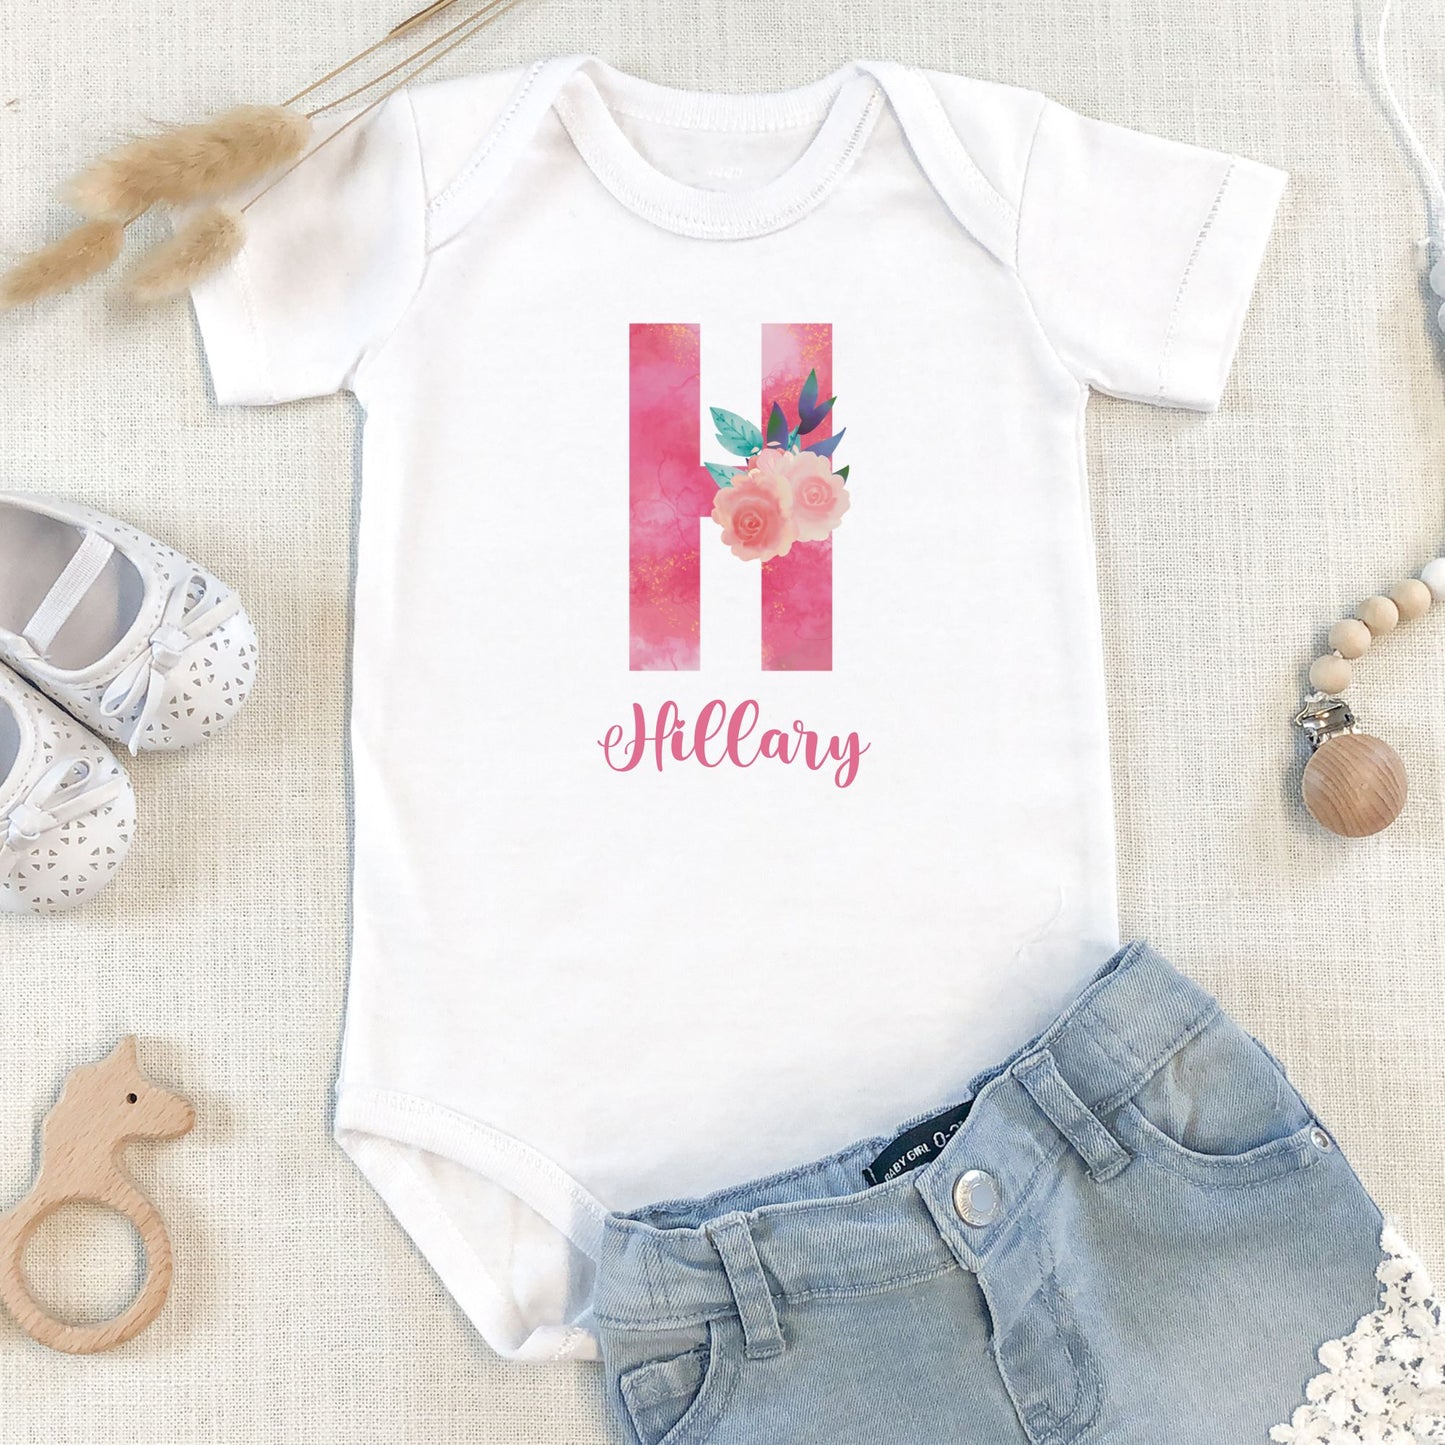 Personalized "Floral Fantasy" Baby Romper / Baby Tees